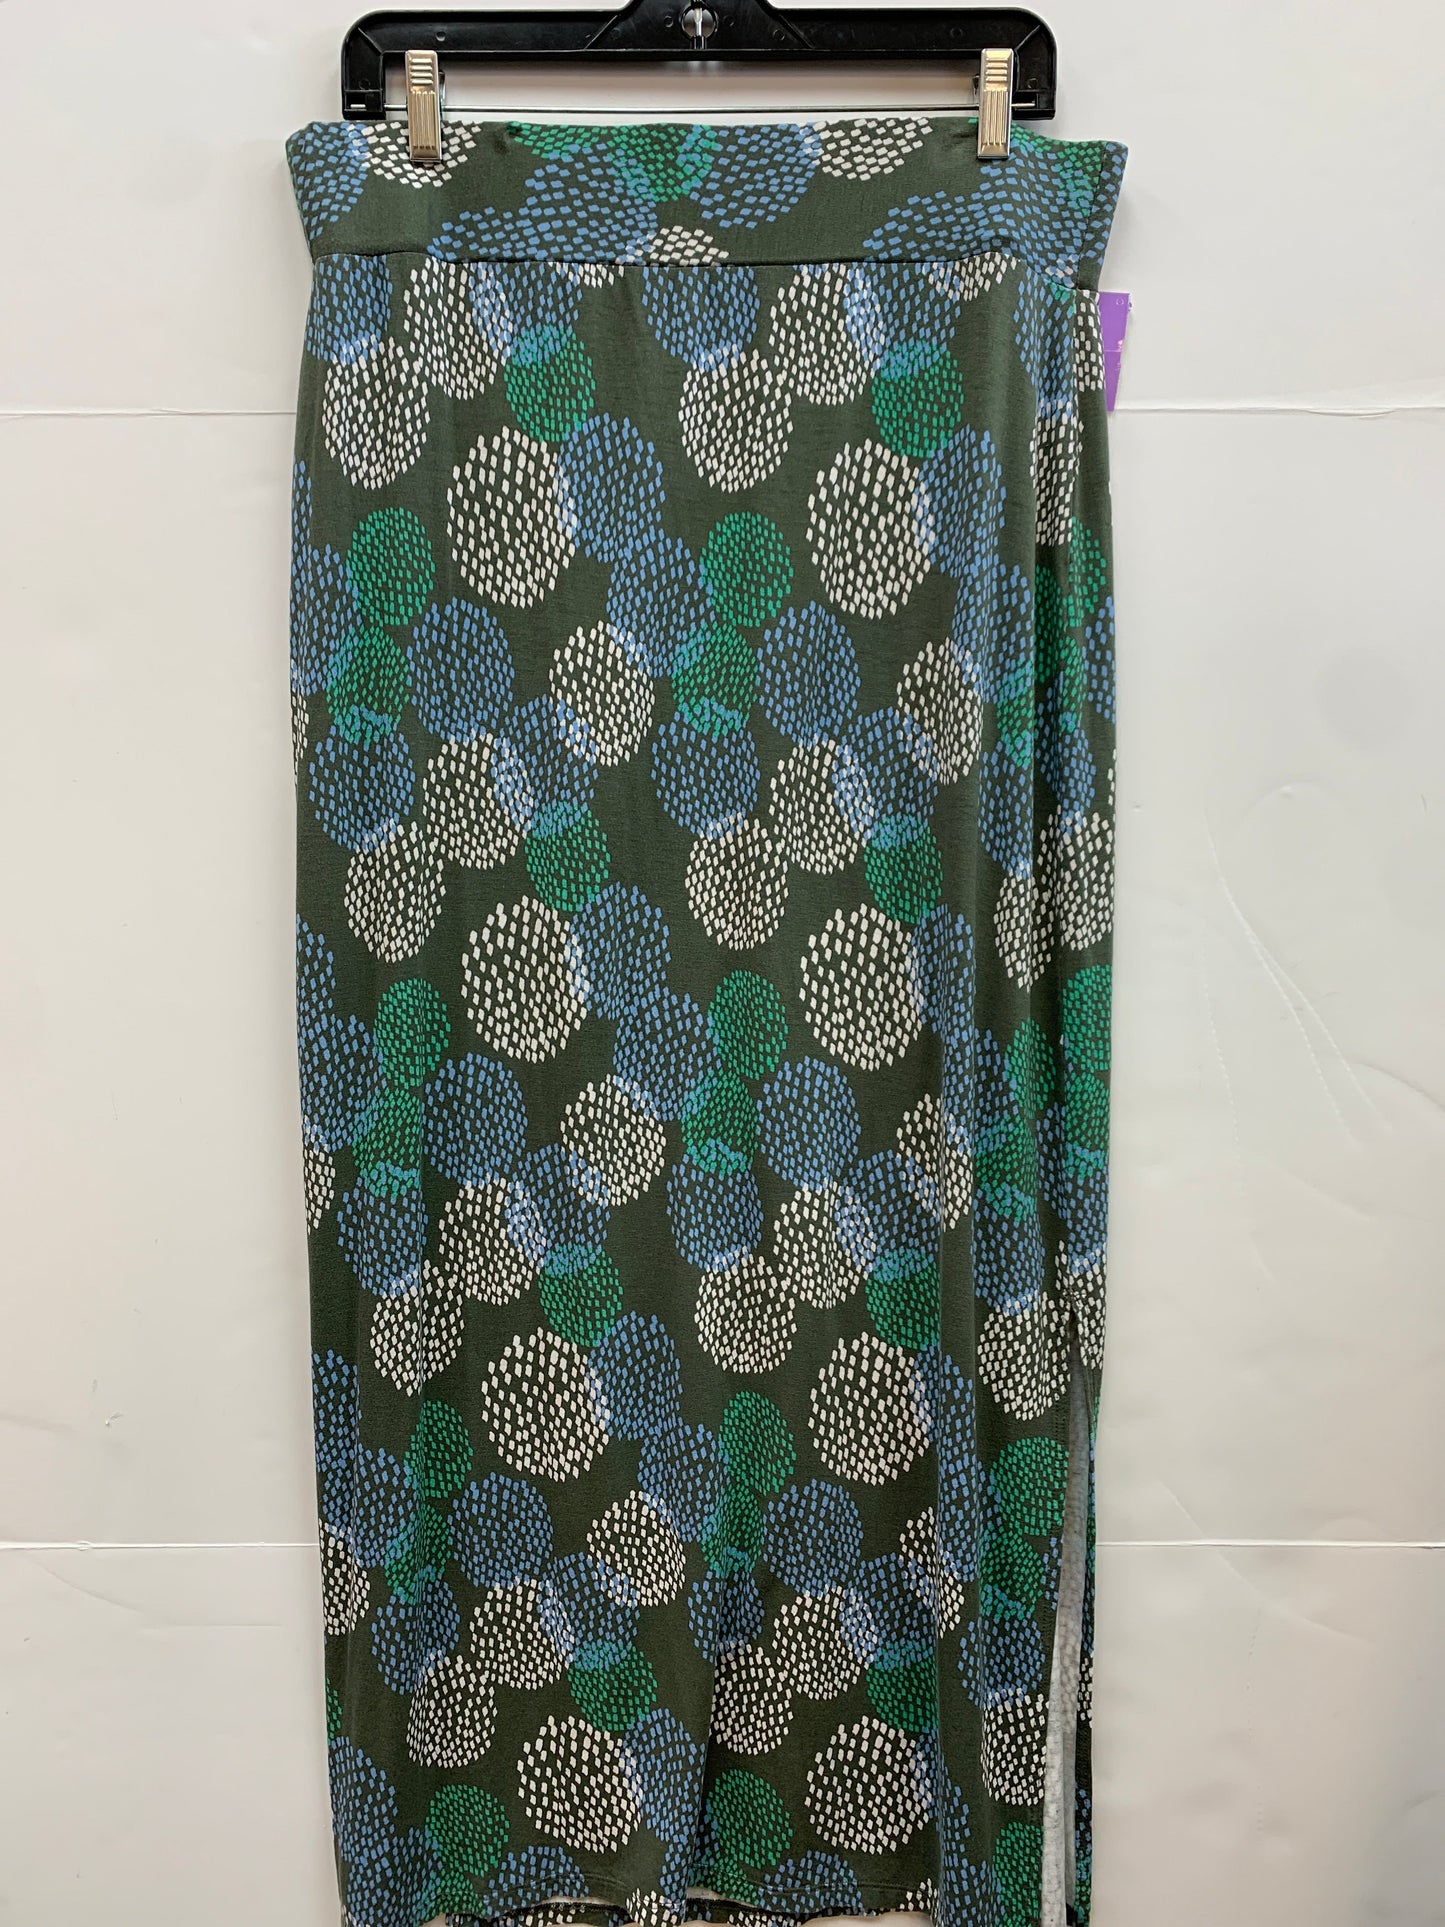 Skirt Maxi By Clothes Mentor  Size: L